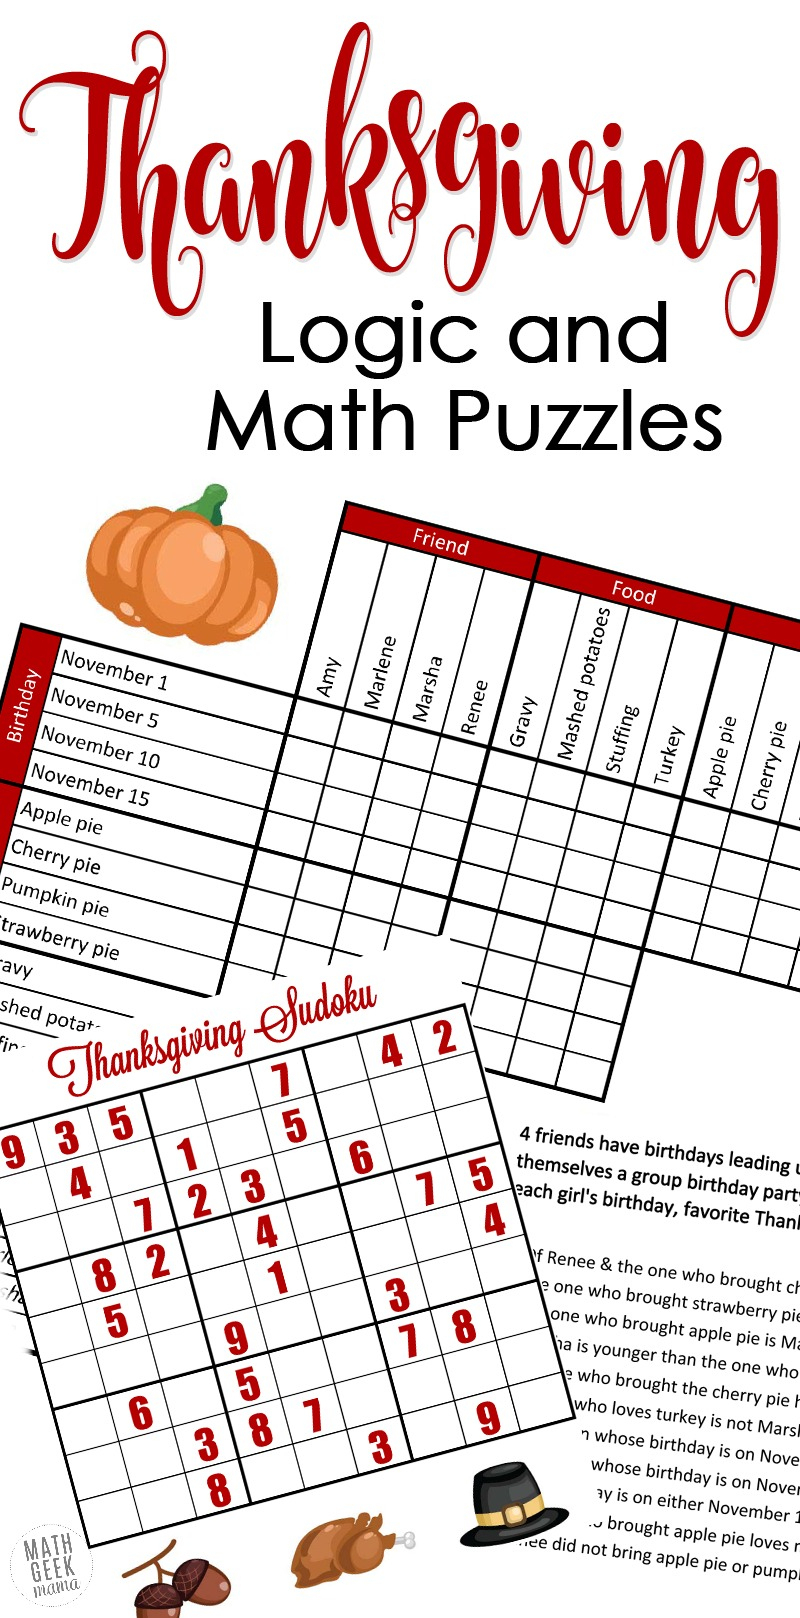 Free} Fun Thanksgiving Math Puzzles For Older Kids - Printable Thanksgiving Puzzles For Adults